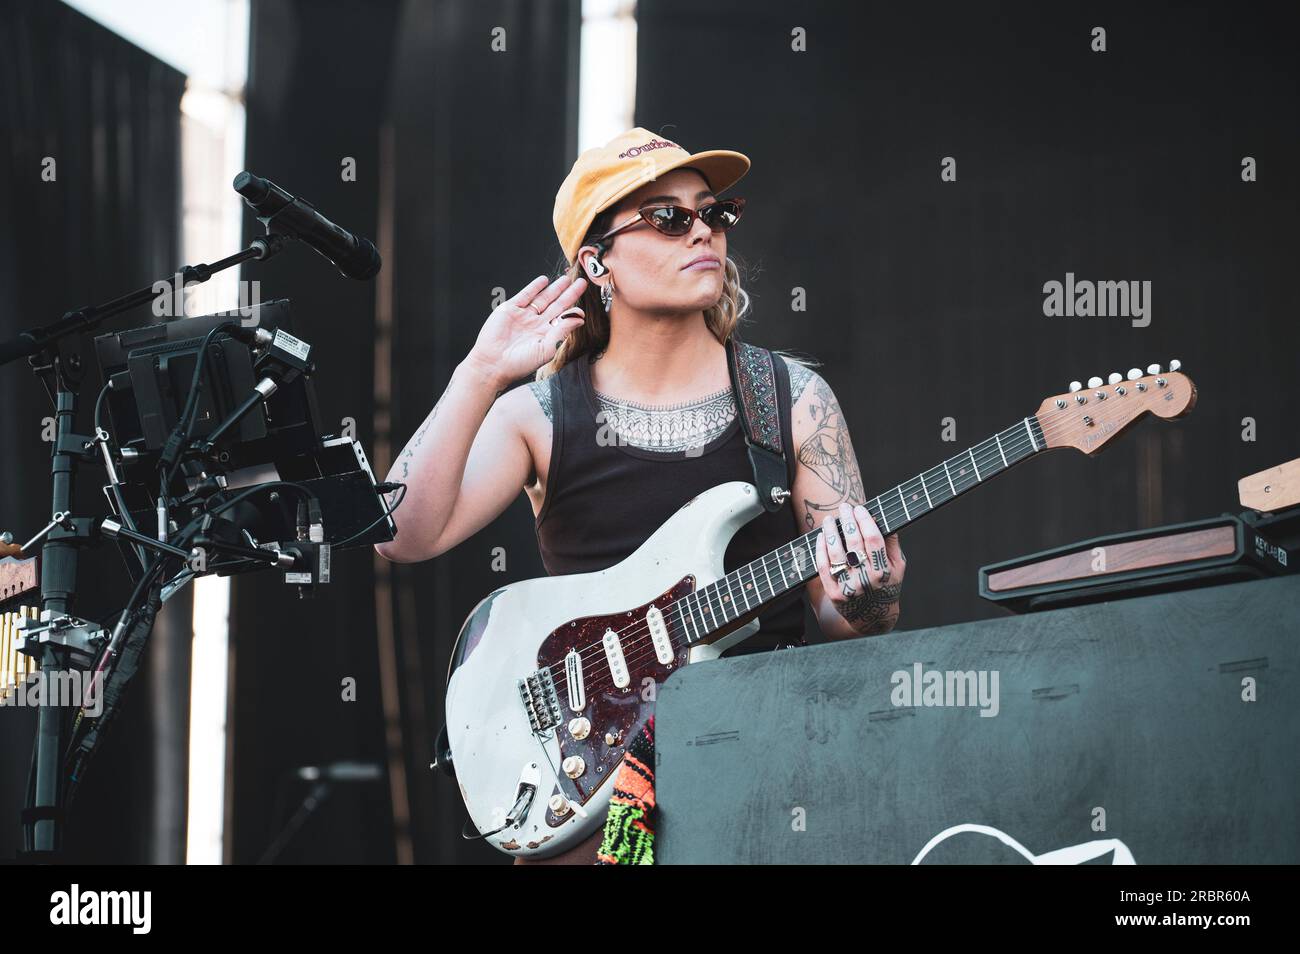 MADRID, MAD COOL FESTIVAL 2023, SPAIN:  The Australian singer, songwriter, multi-instrumentalist, music producer and audio engineer Tash Sultana (real name Natasha Sultana) performing live on stage at the Mad Cool Festival 2023. Stock Photo